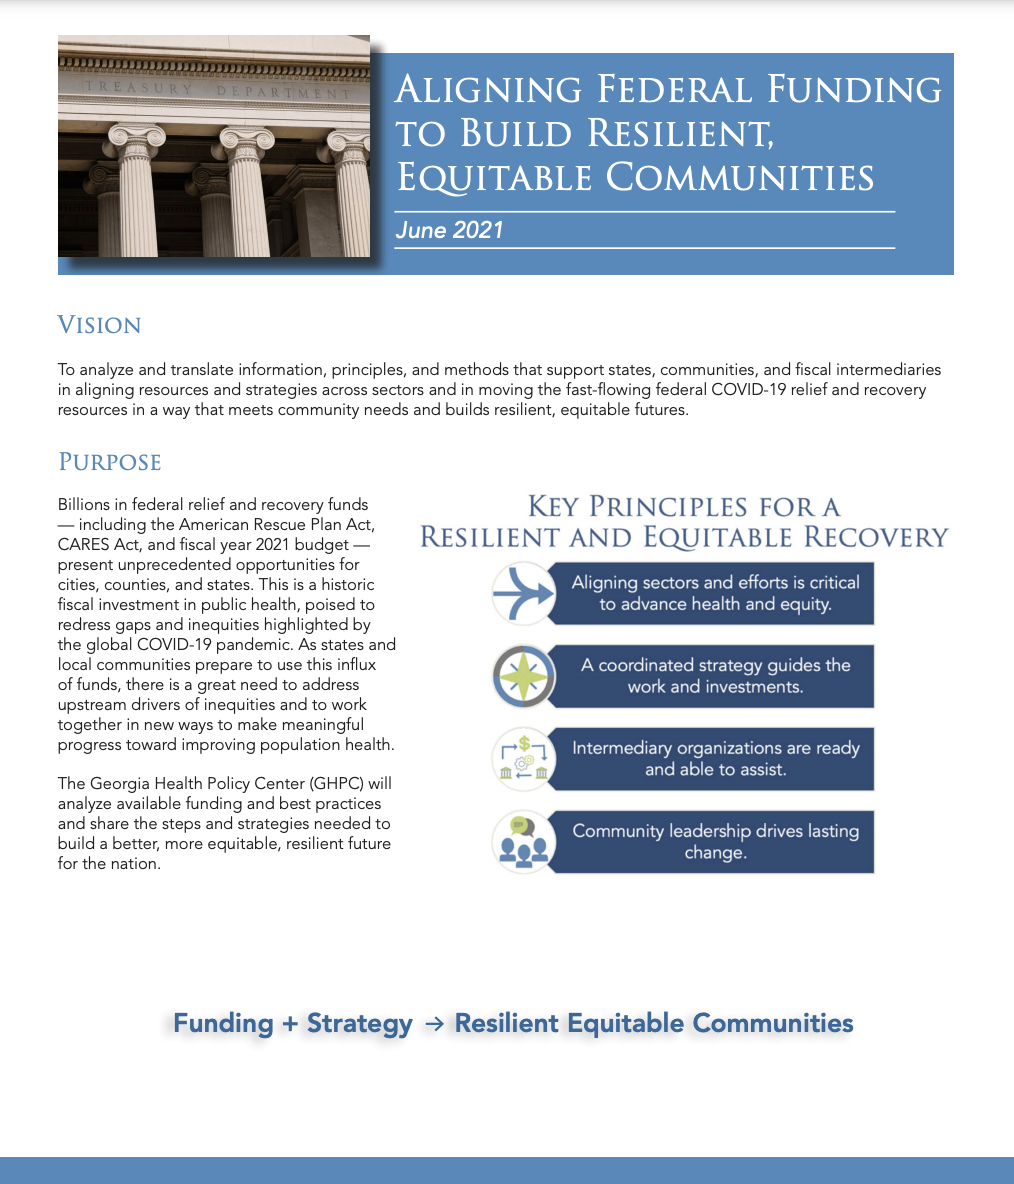 Aligning Federal Funding to Build Resilient, Equitable Communities